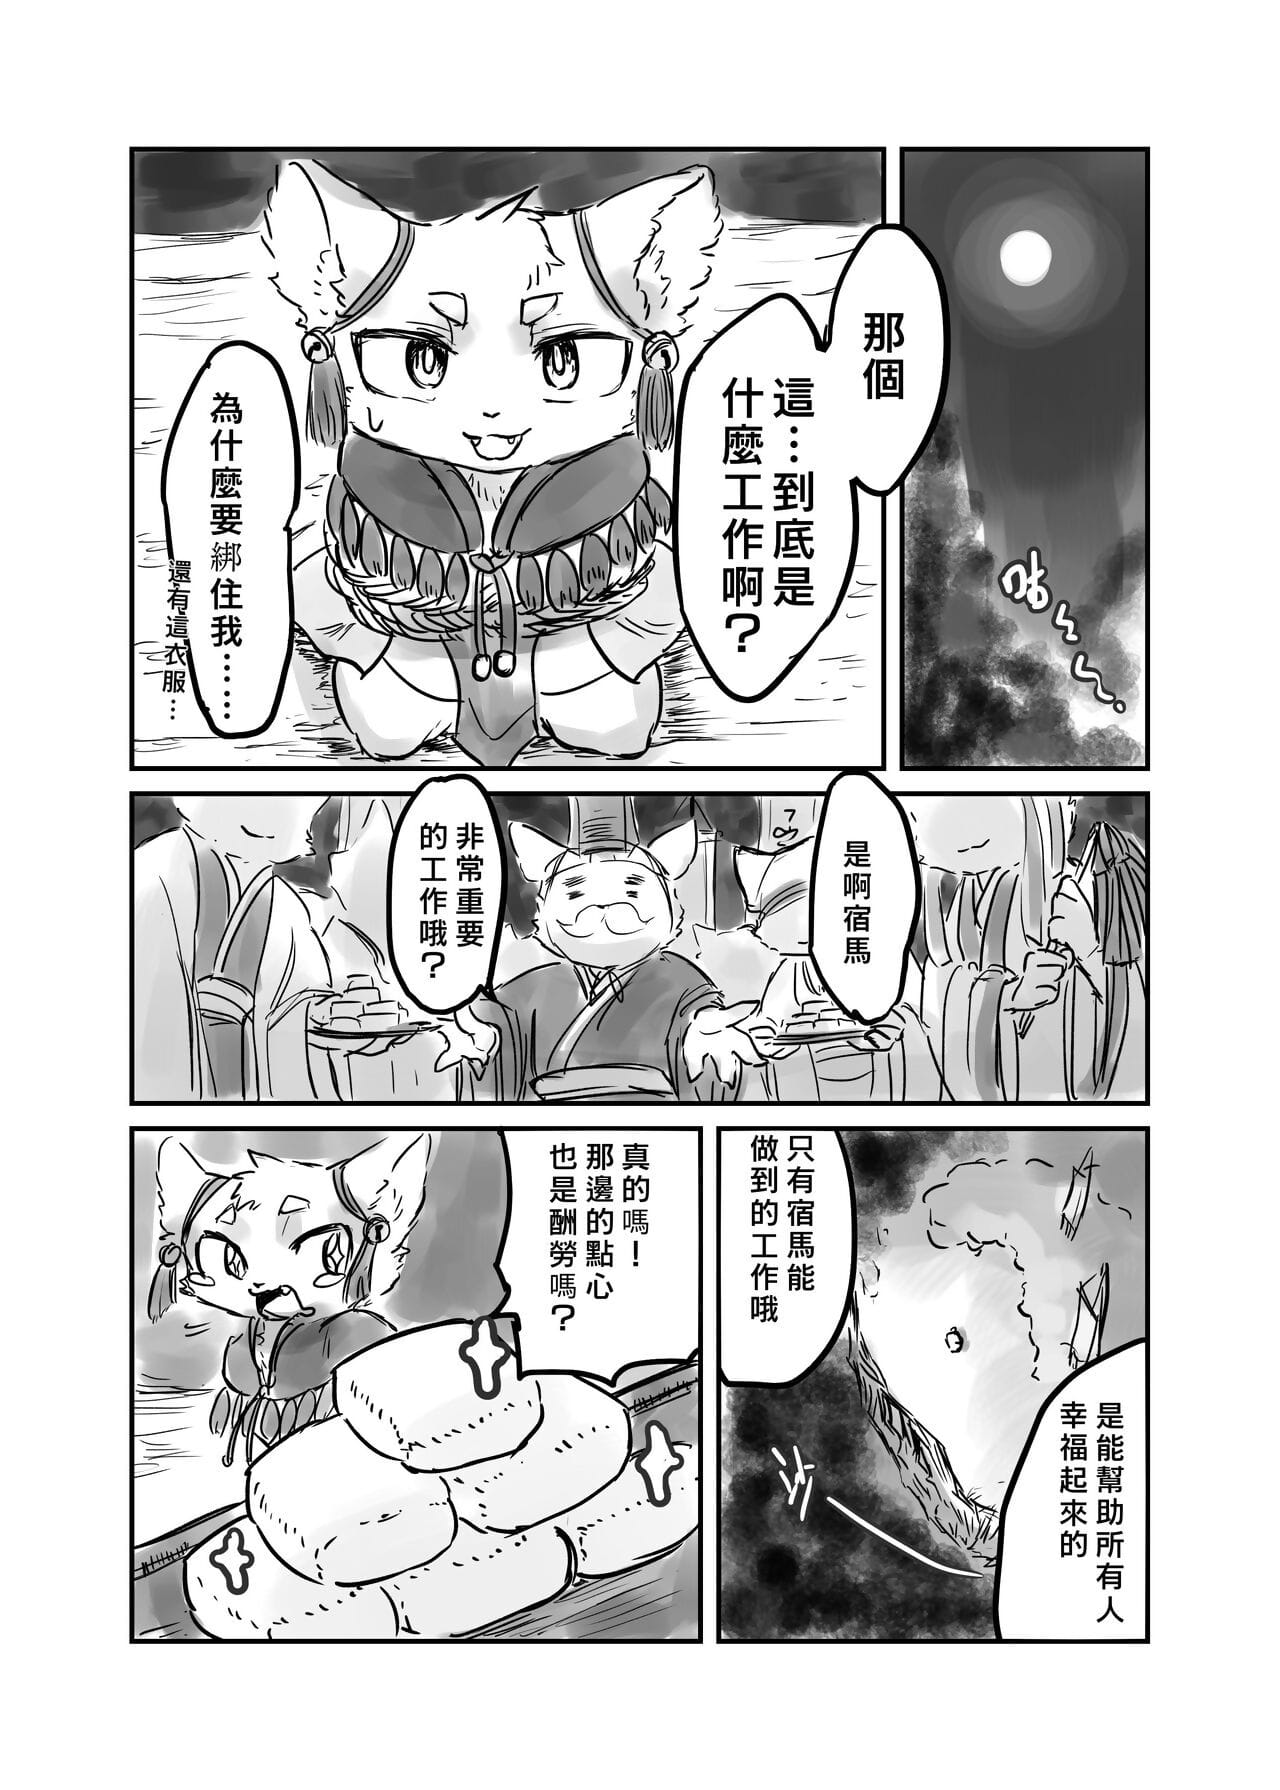 （the visiteur 他乡之人 by：鬼流 PARTIE 3 page 1